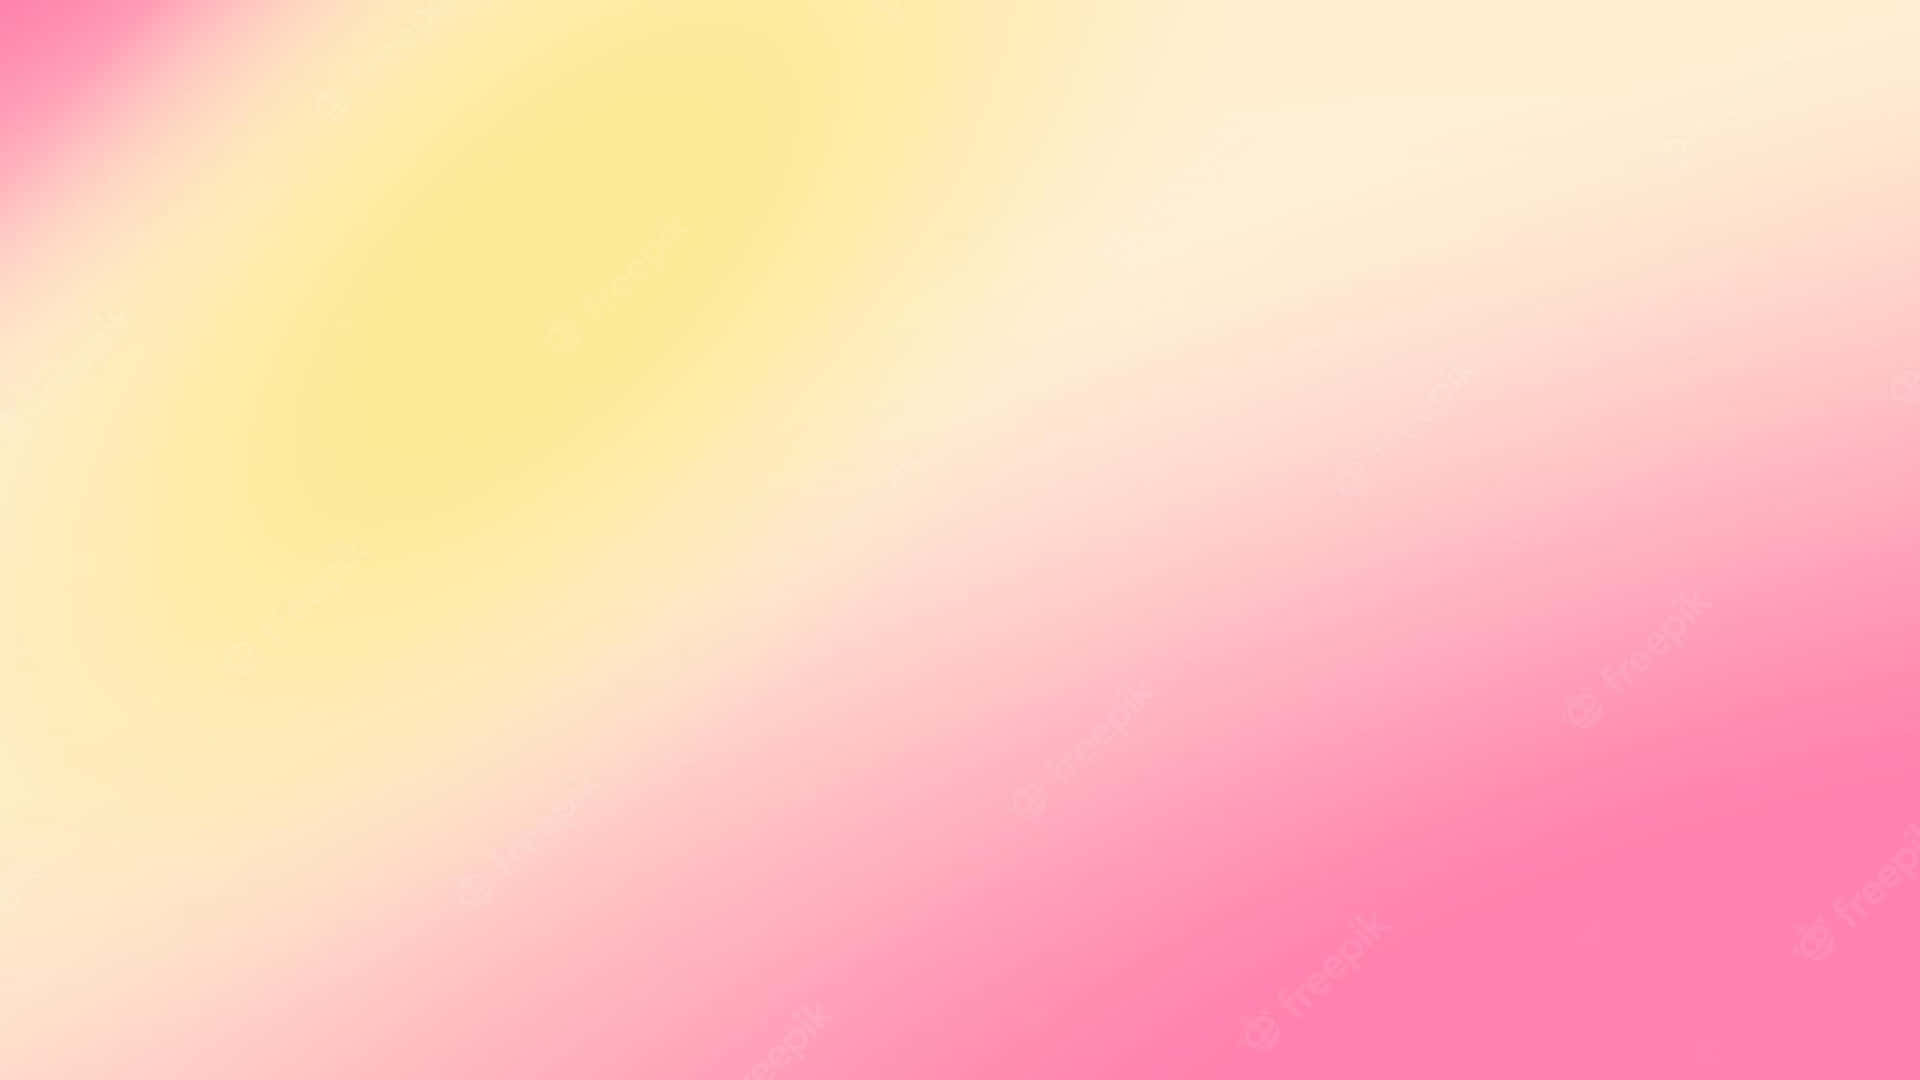 A Pink And Yellow Abstract Background Wallpaper